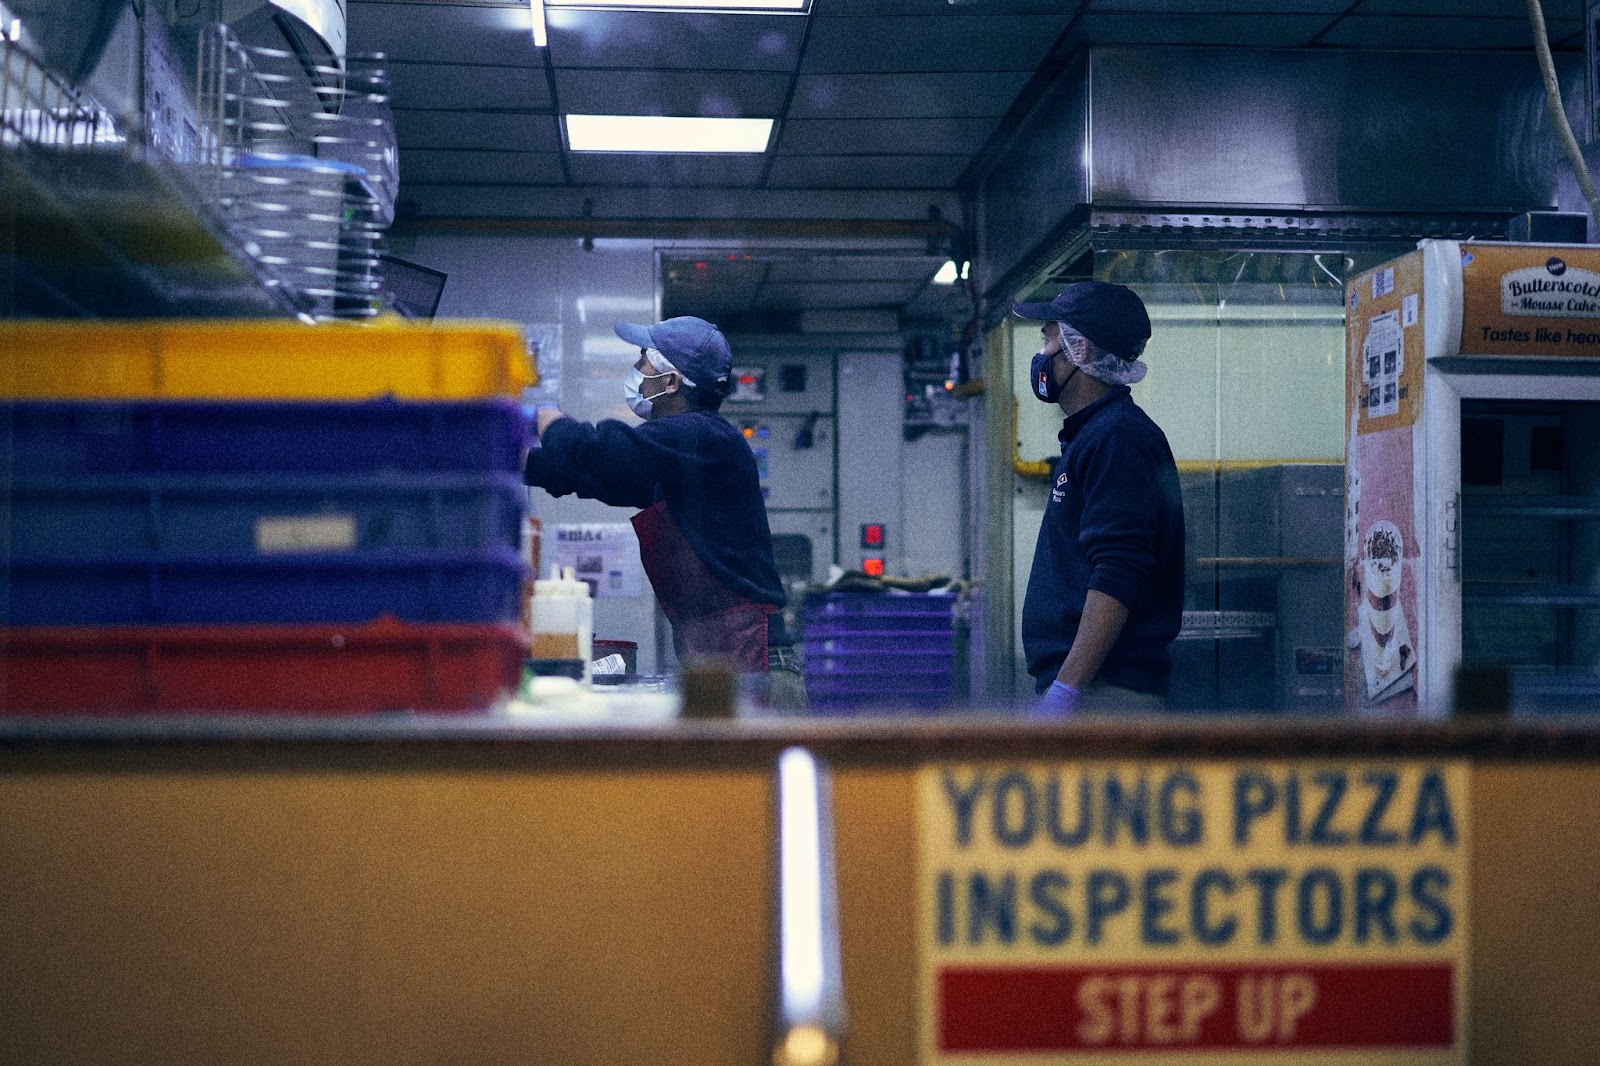 Employees  preparing customer orders in Domino's Pizza, a popular restaurant franchise.